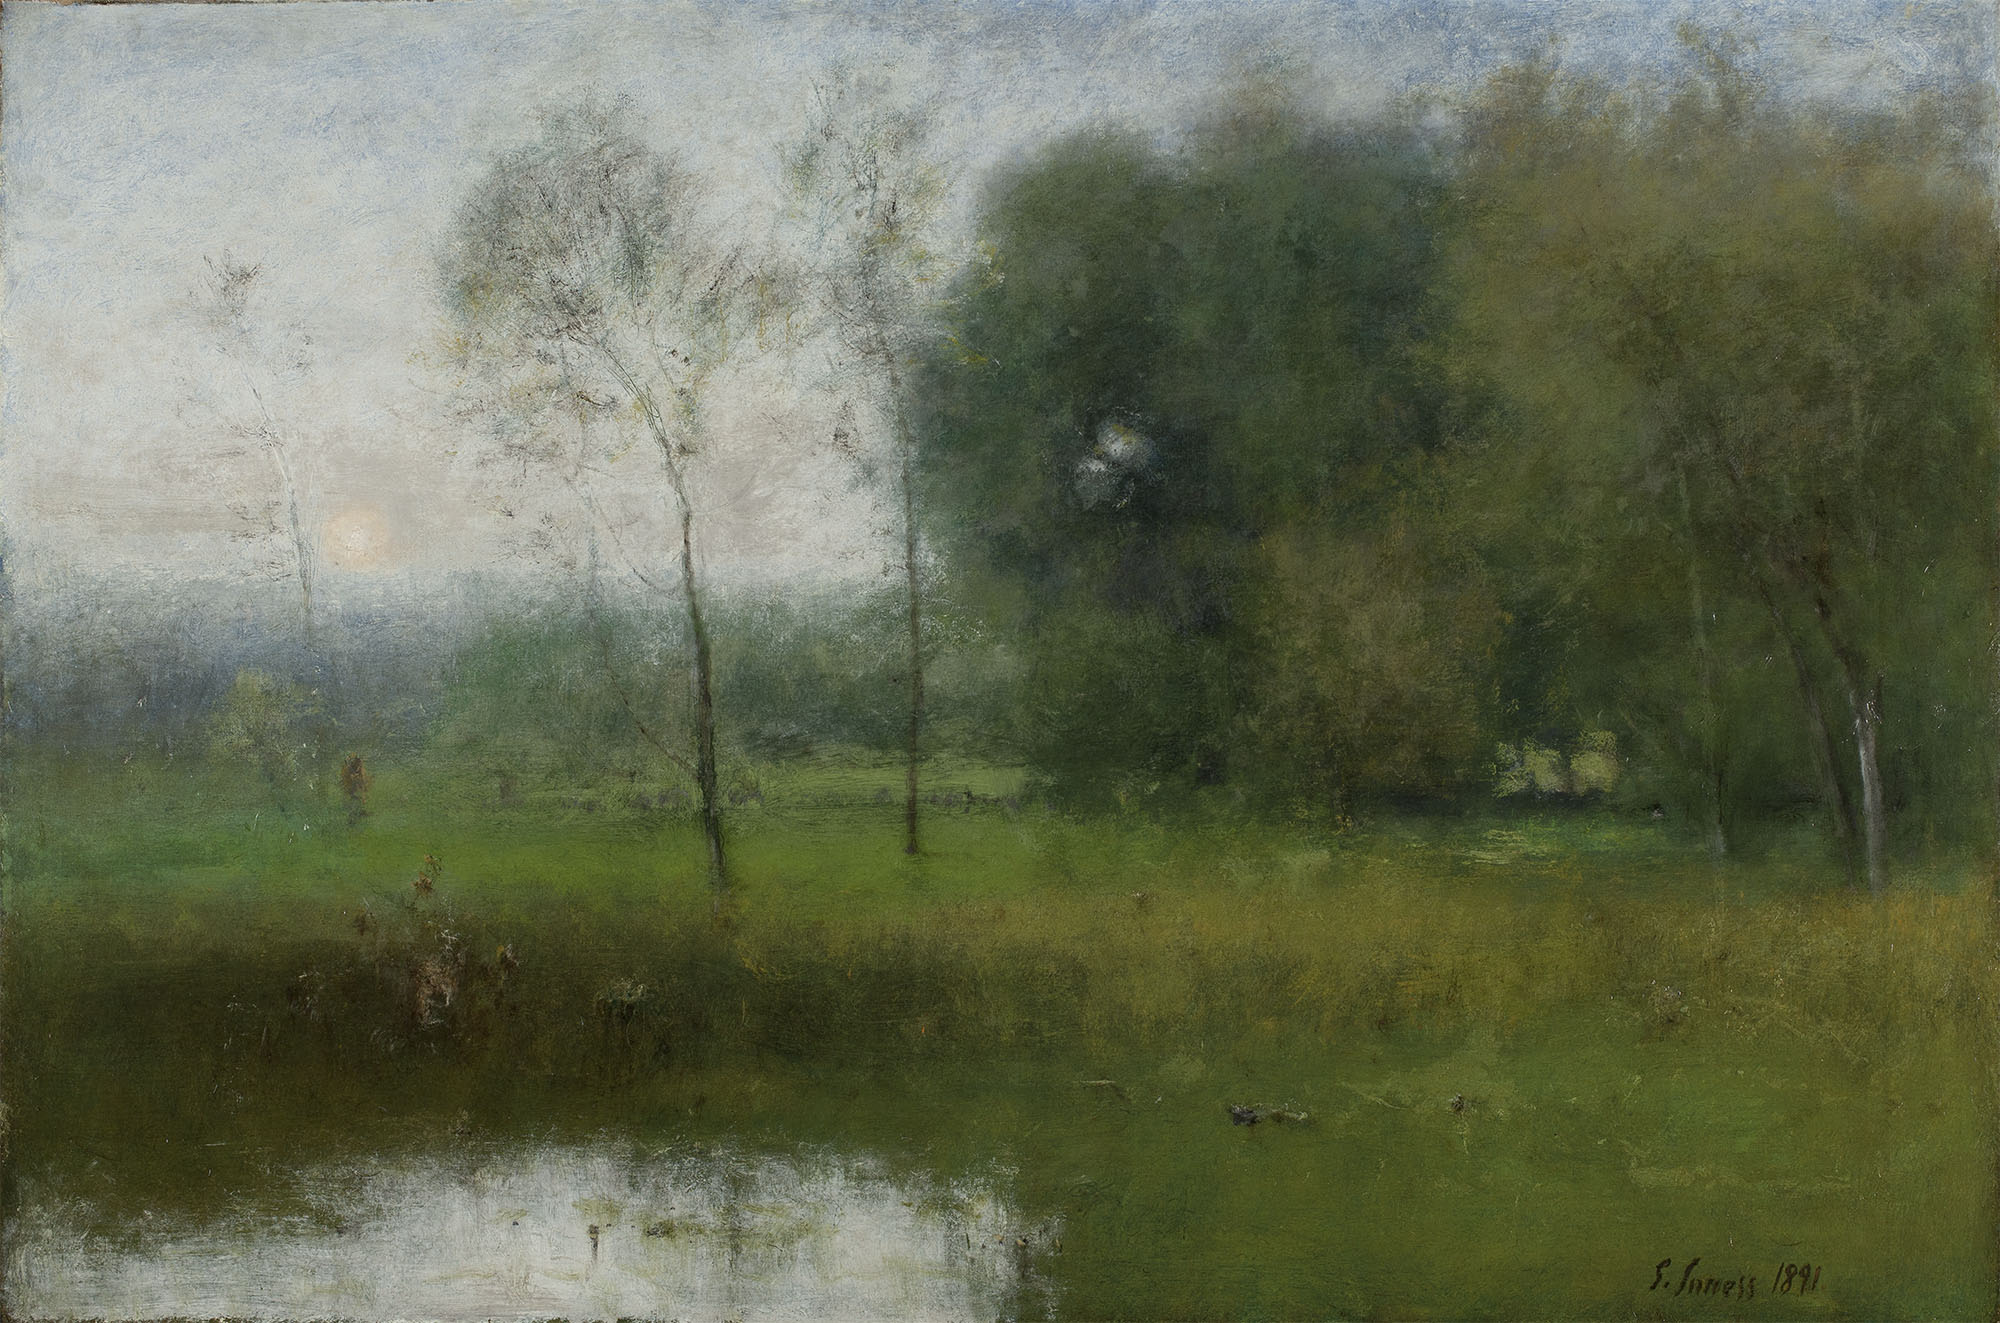 George Inness (American, 1825–1894), New Jersey Landscape, 1891. Sterling and Francine Clark Art Institute, Williamstown, Massachusetts. Gift of Frank and Katherine Martucci, 2013. (Public domain).